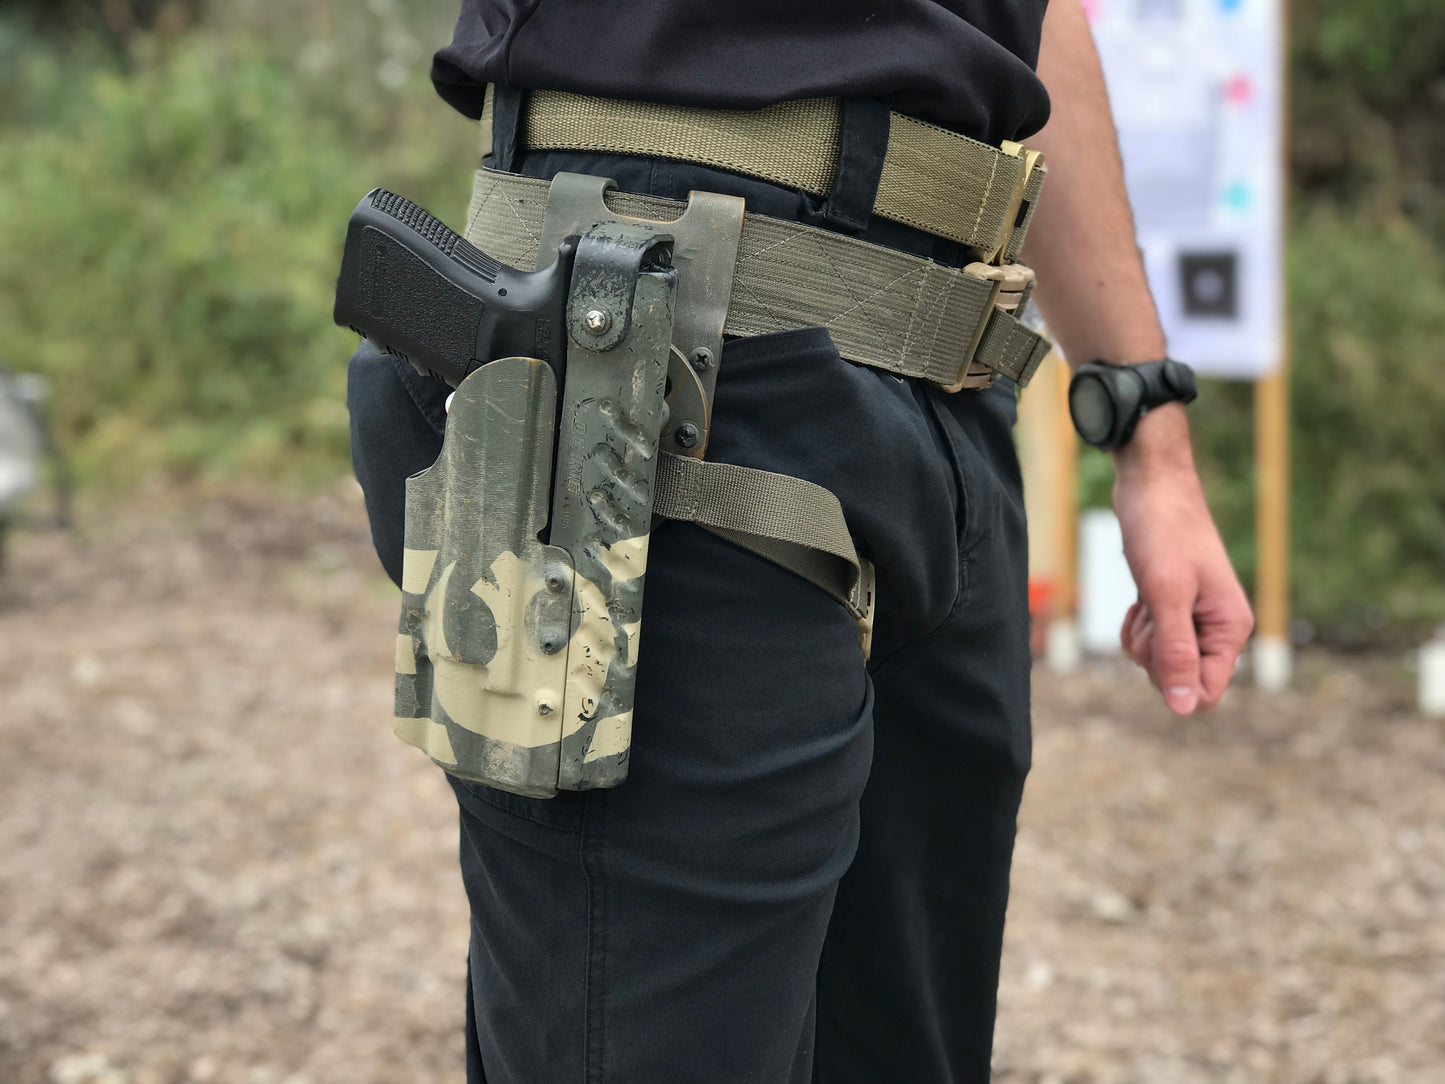 NUHTS - Never Unstable Holster Tactical Strap